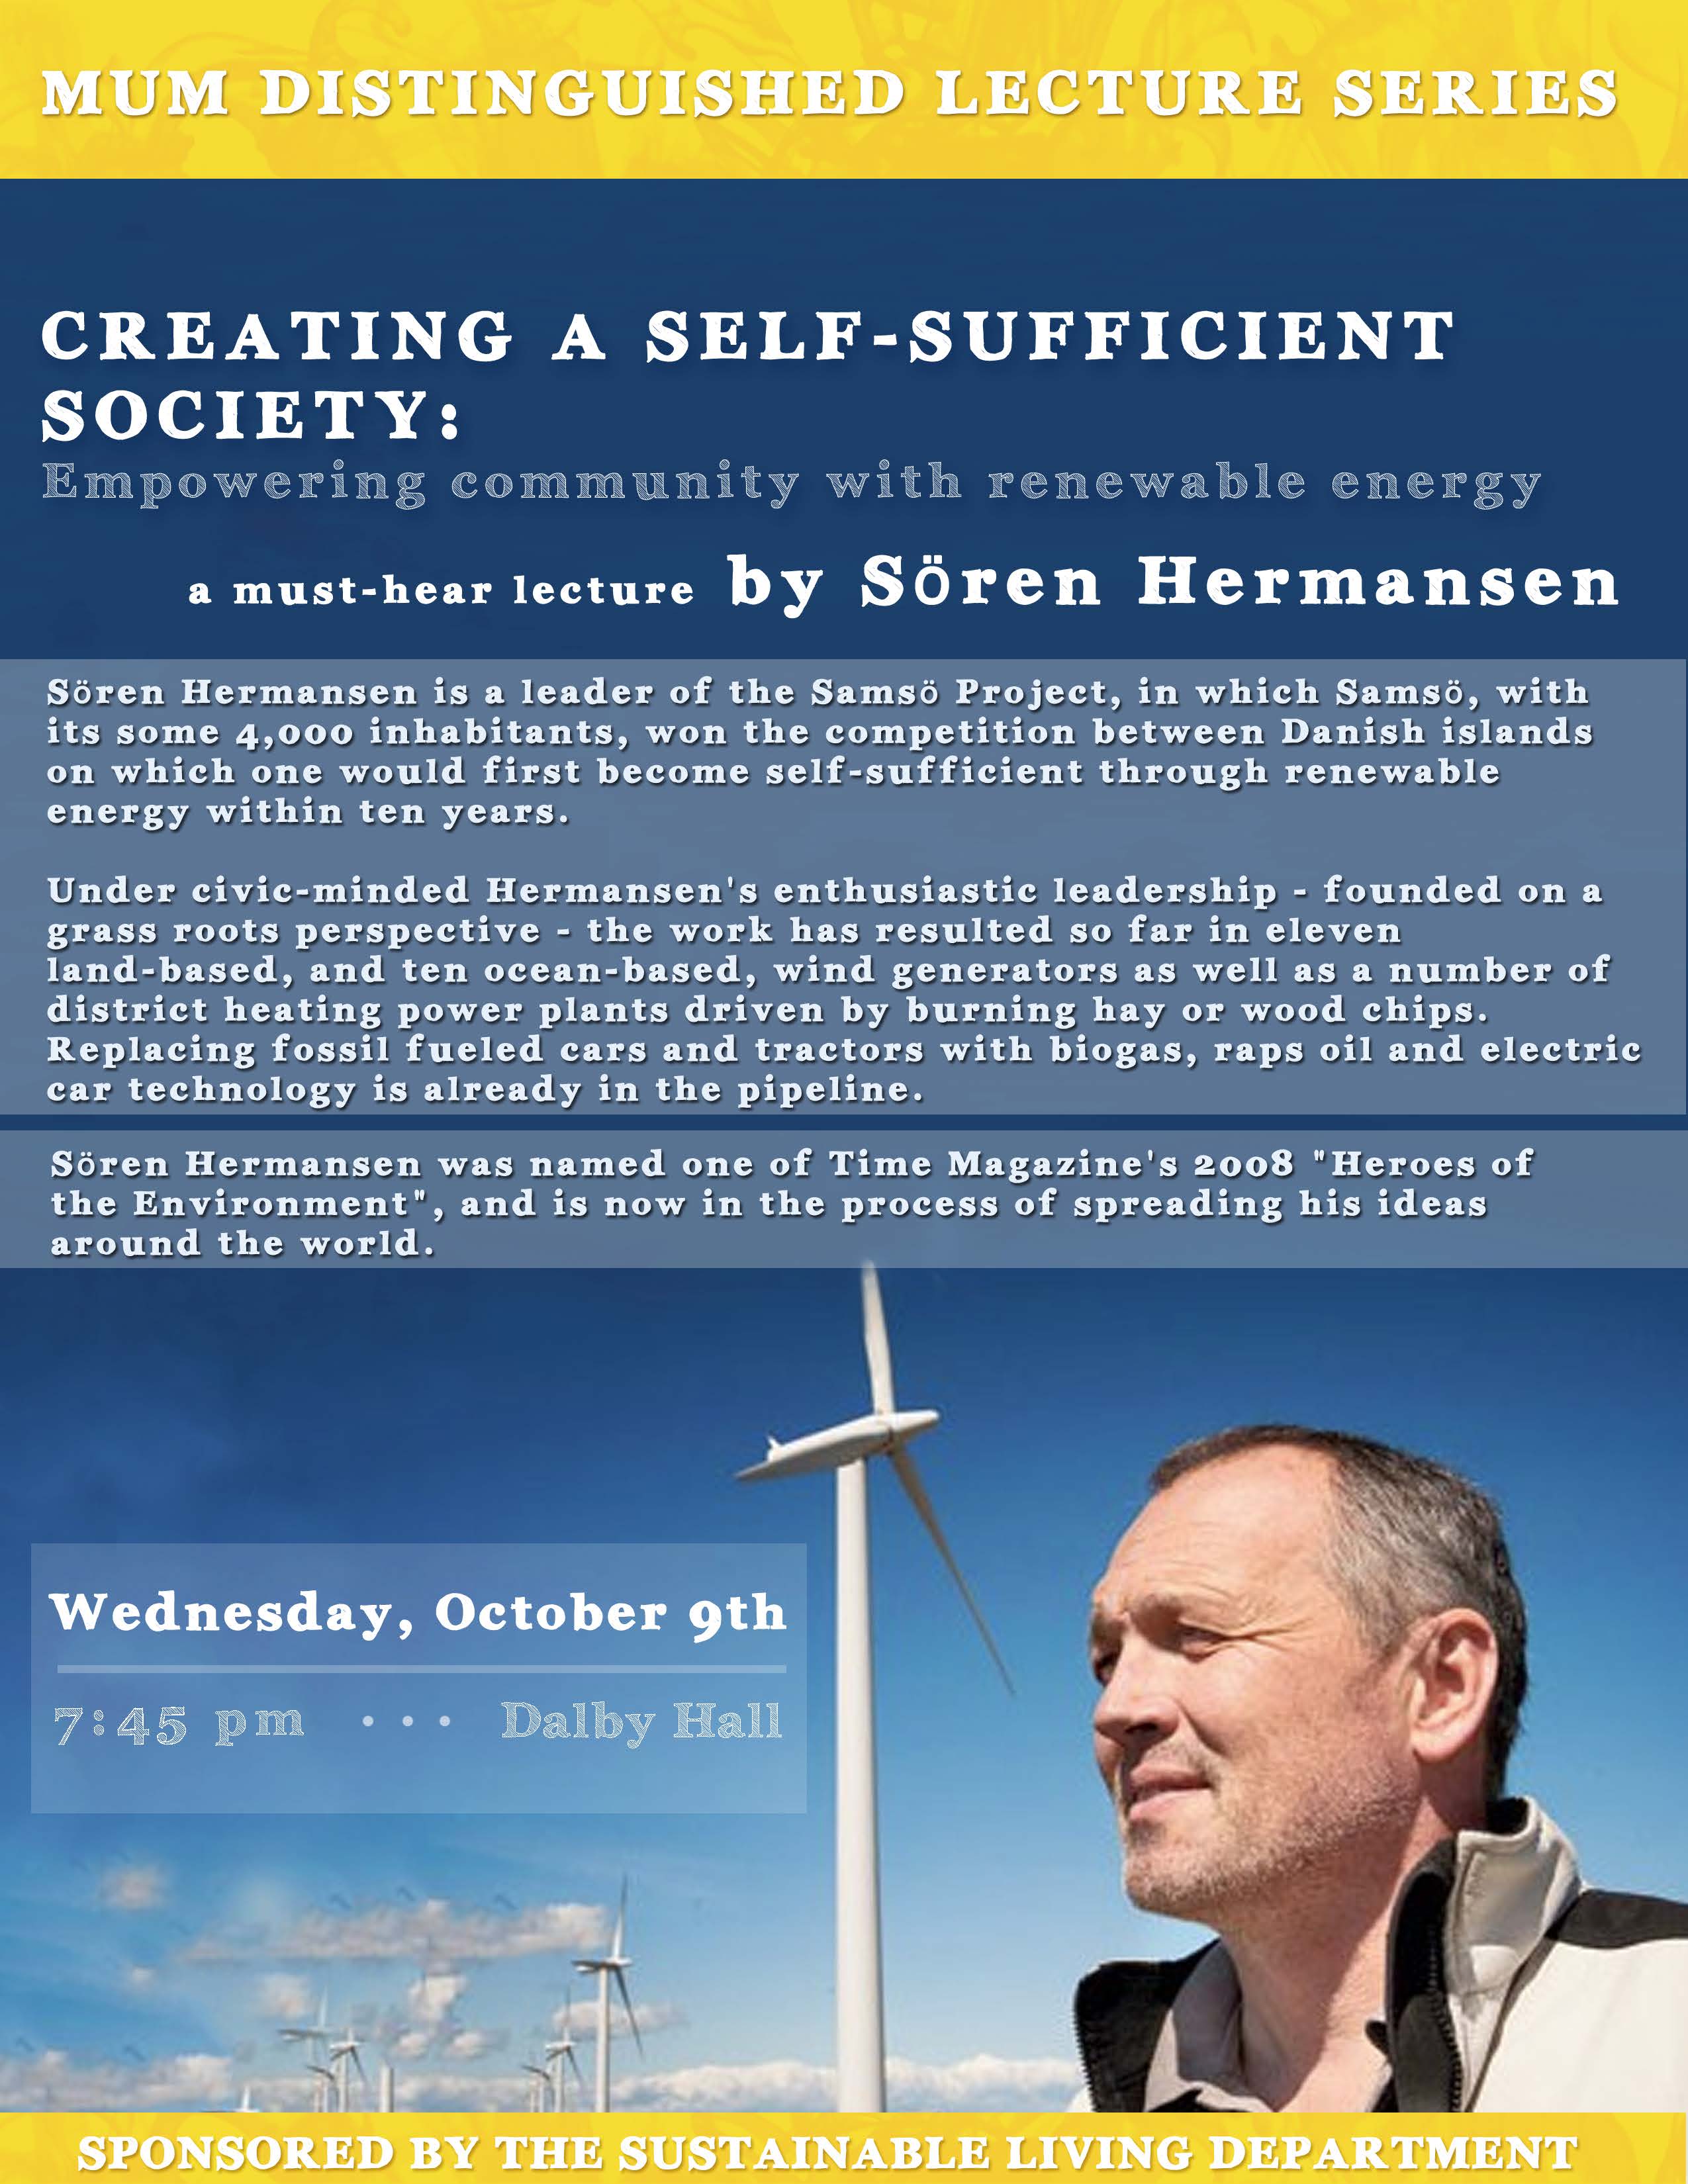 Creating A Self-Sufficient Society - lecture by Søren Hermansen